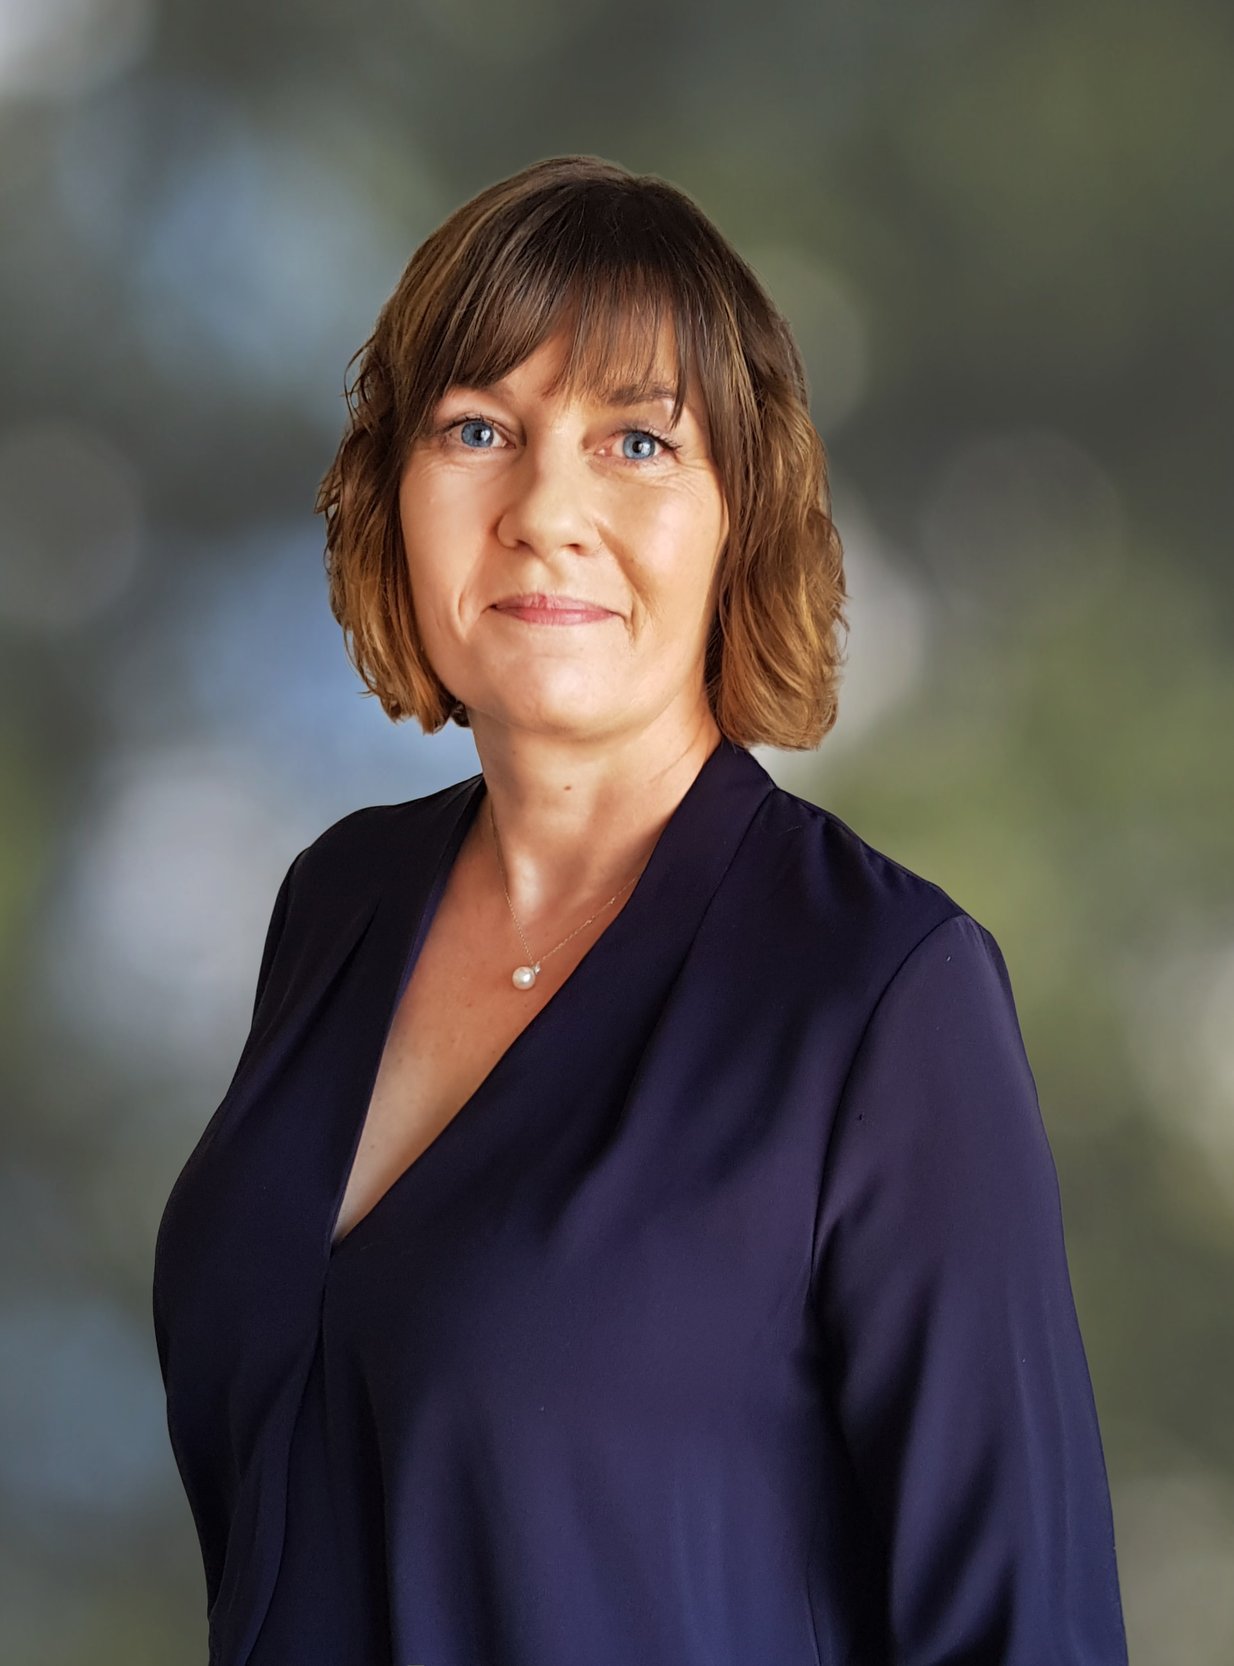 Fiona Bayle joins WiFi SPARK as the new Head of Healthcare